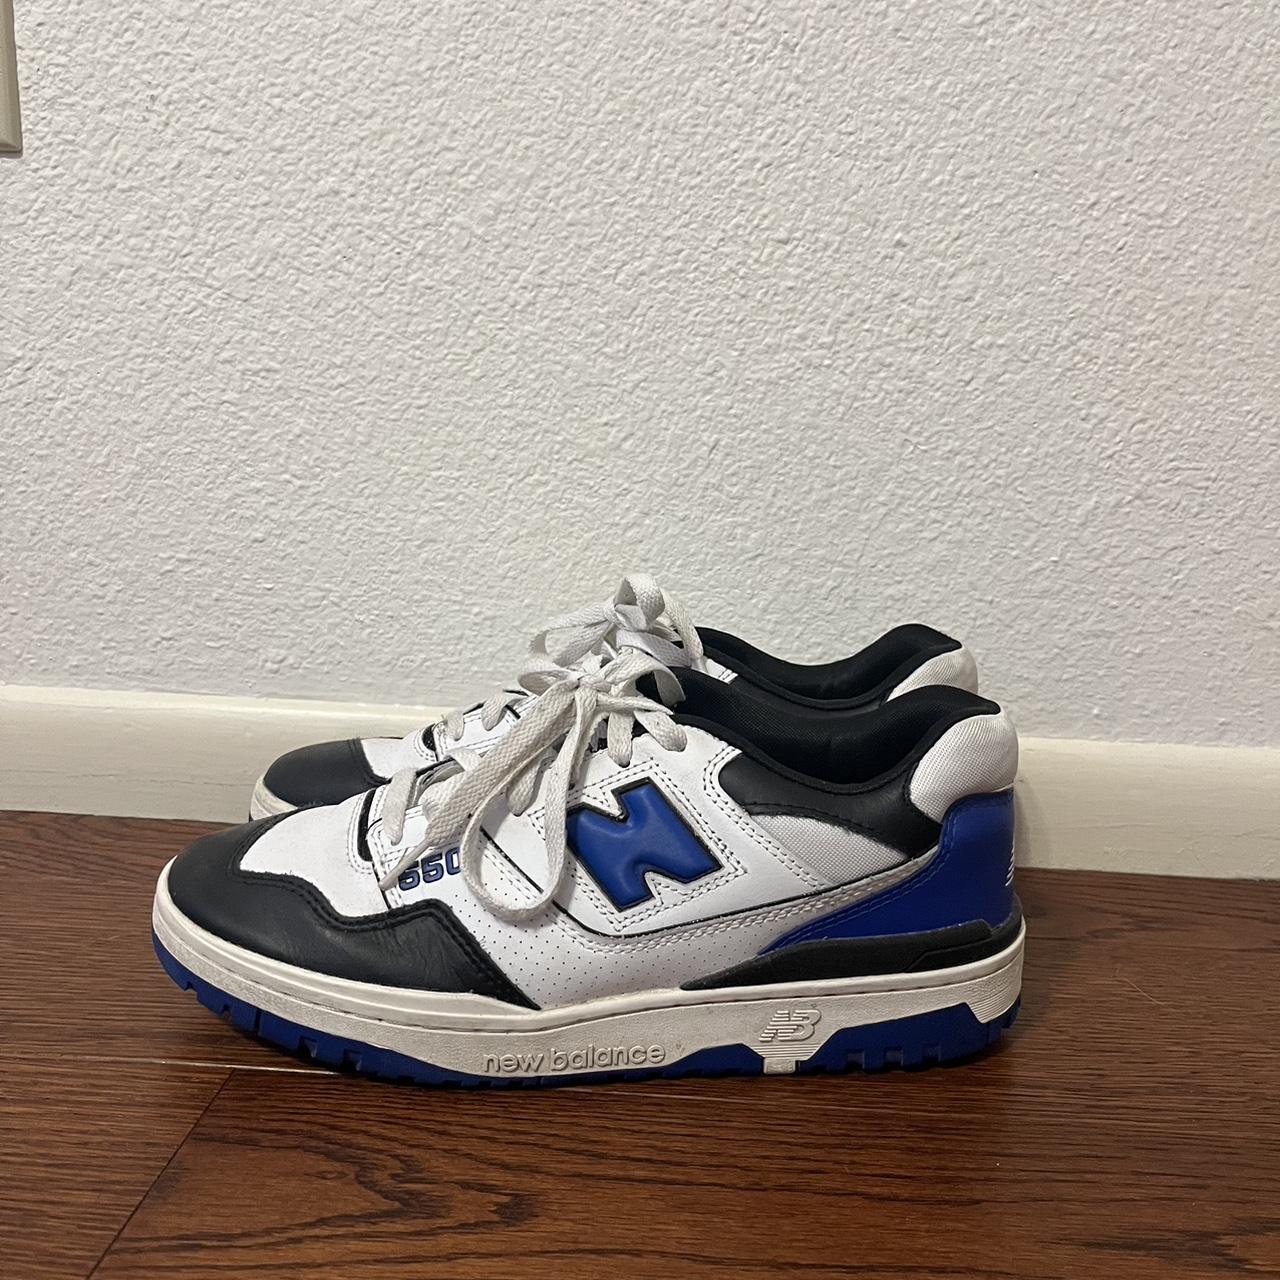 New Balance Men's Blue and Black Trainers